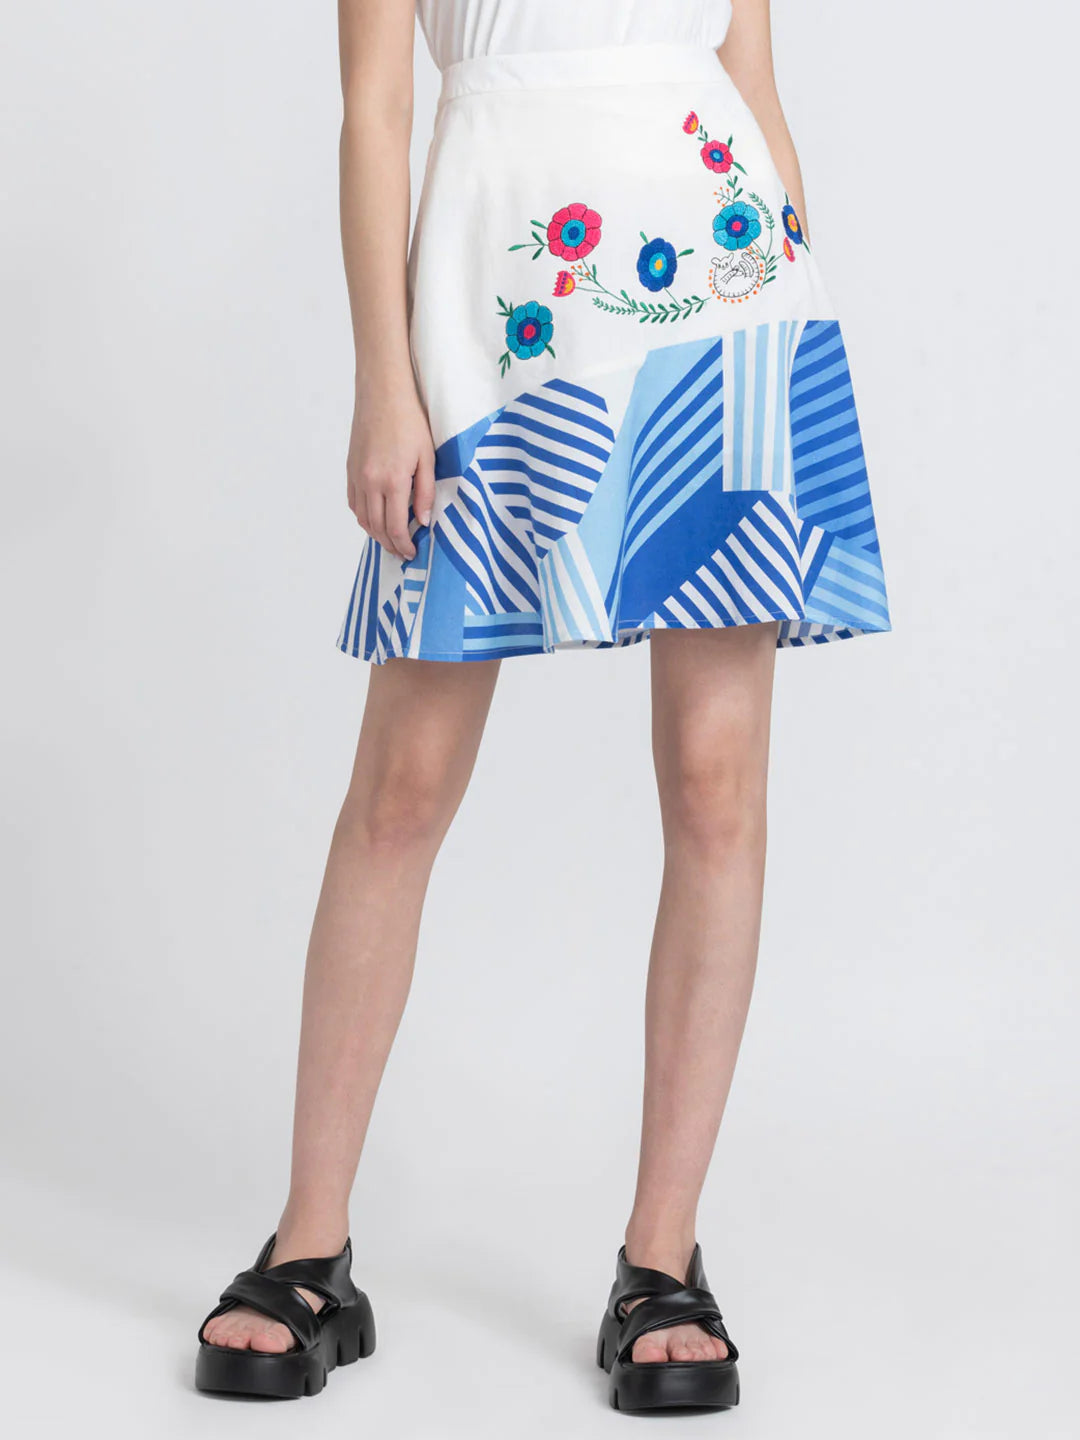 White Printed Fit Skirt | White Printed Fit & Flare Skirt